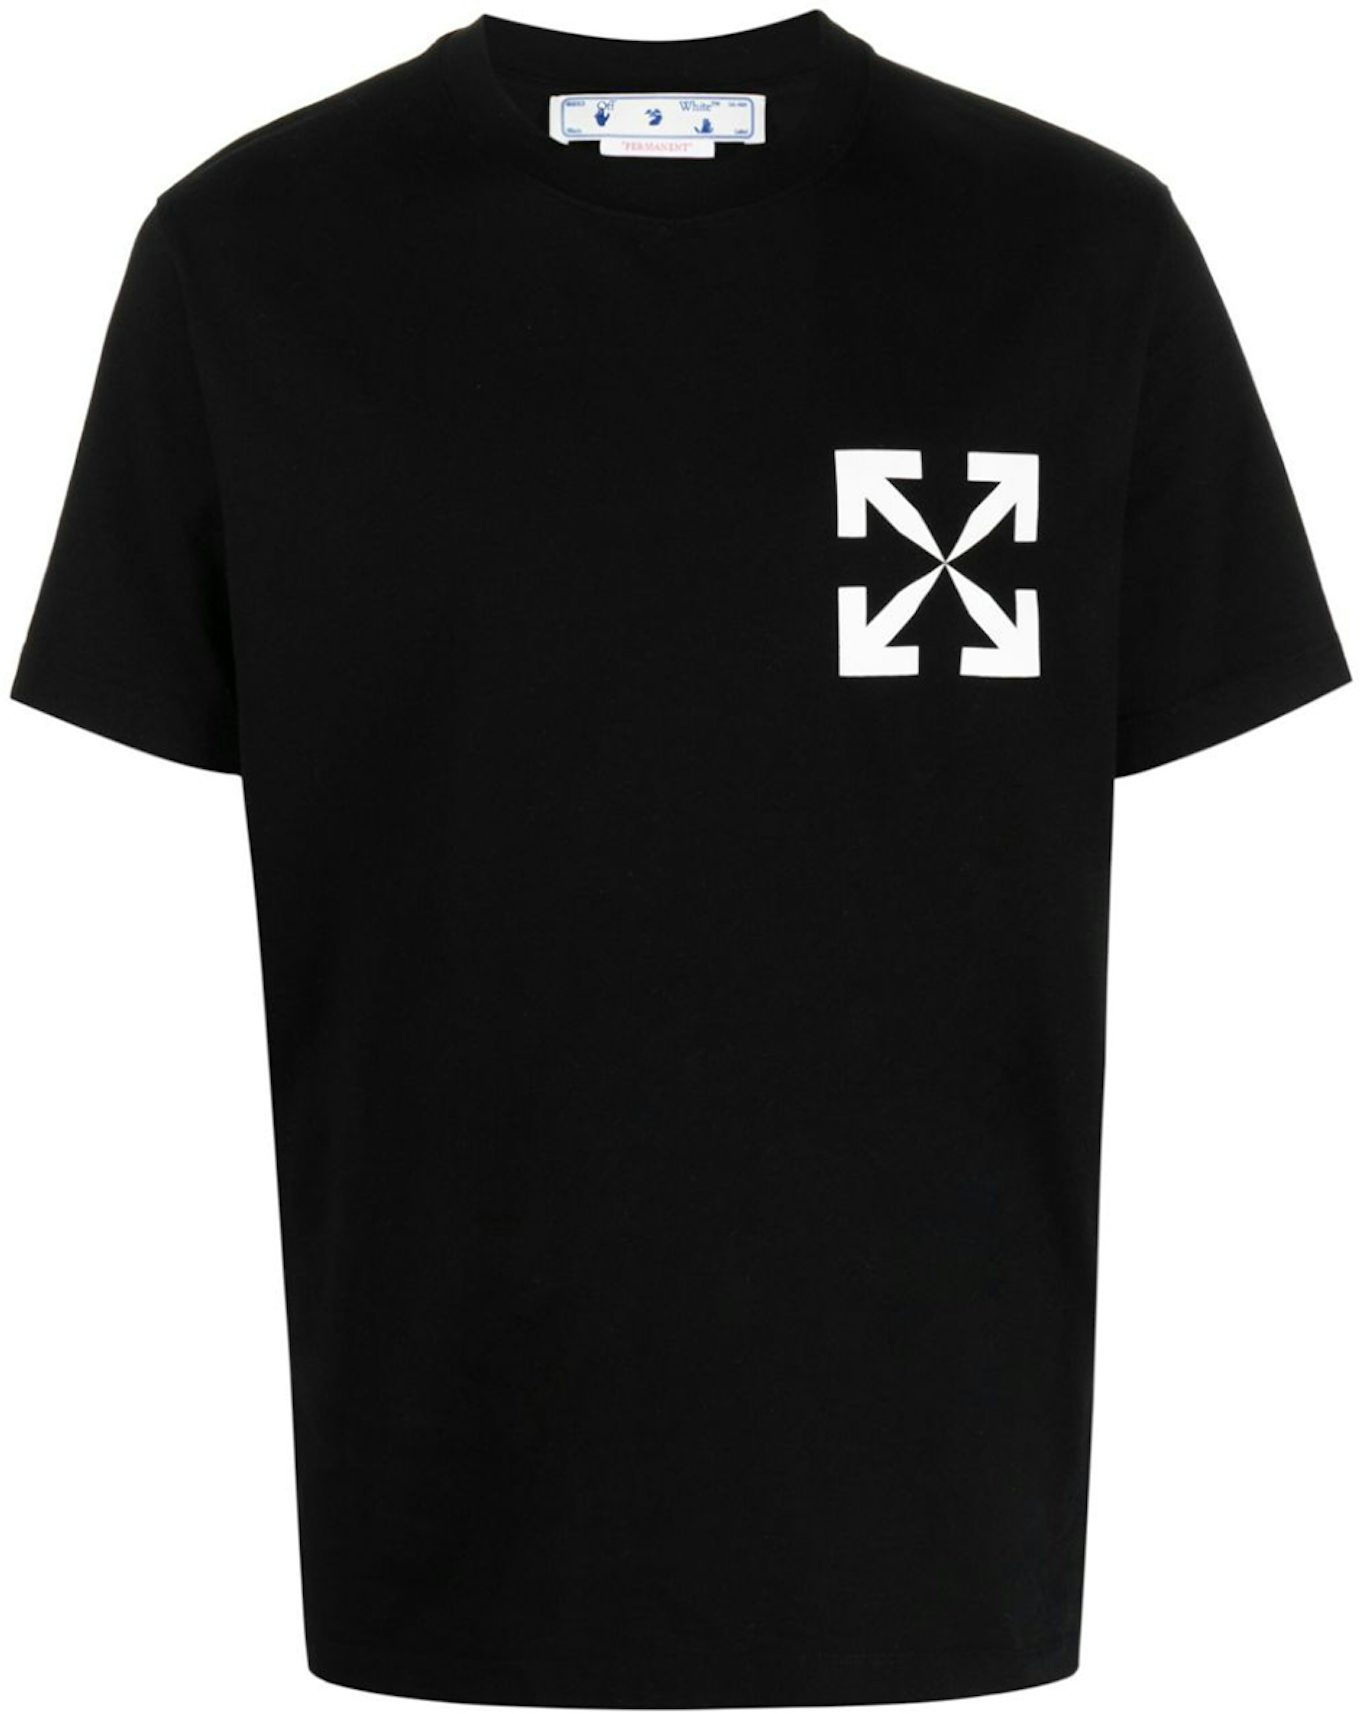 Off-White c/o Virgil Abloh Temperature Arrows T-shirt in Black for